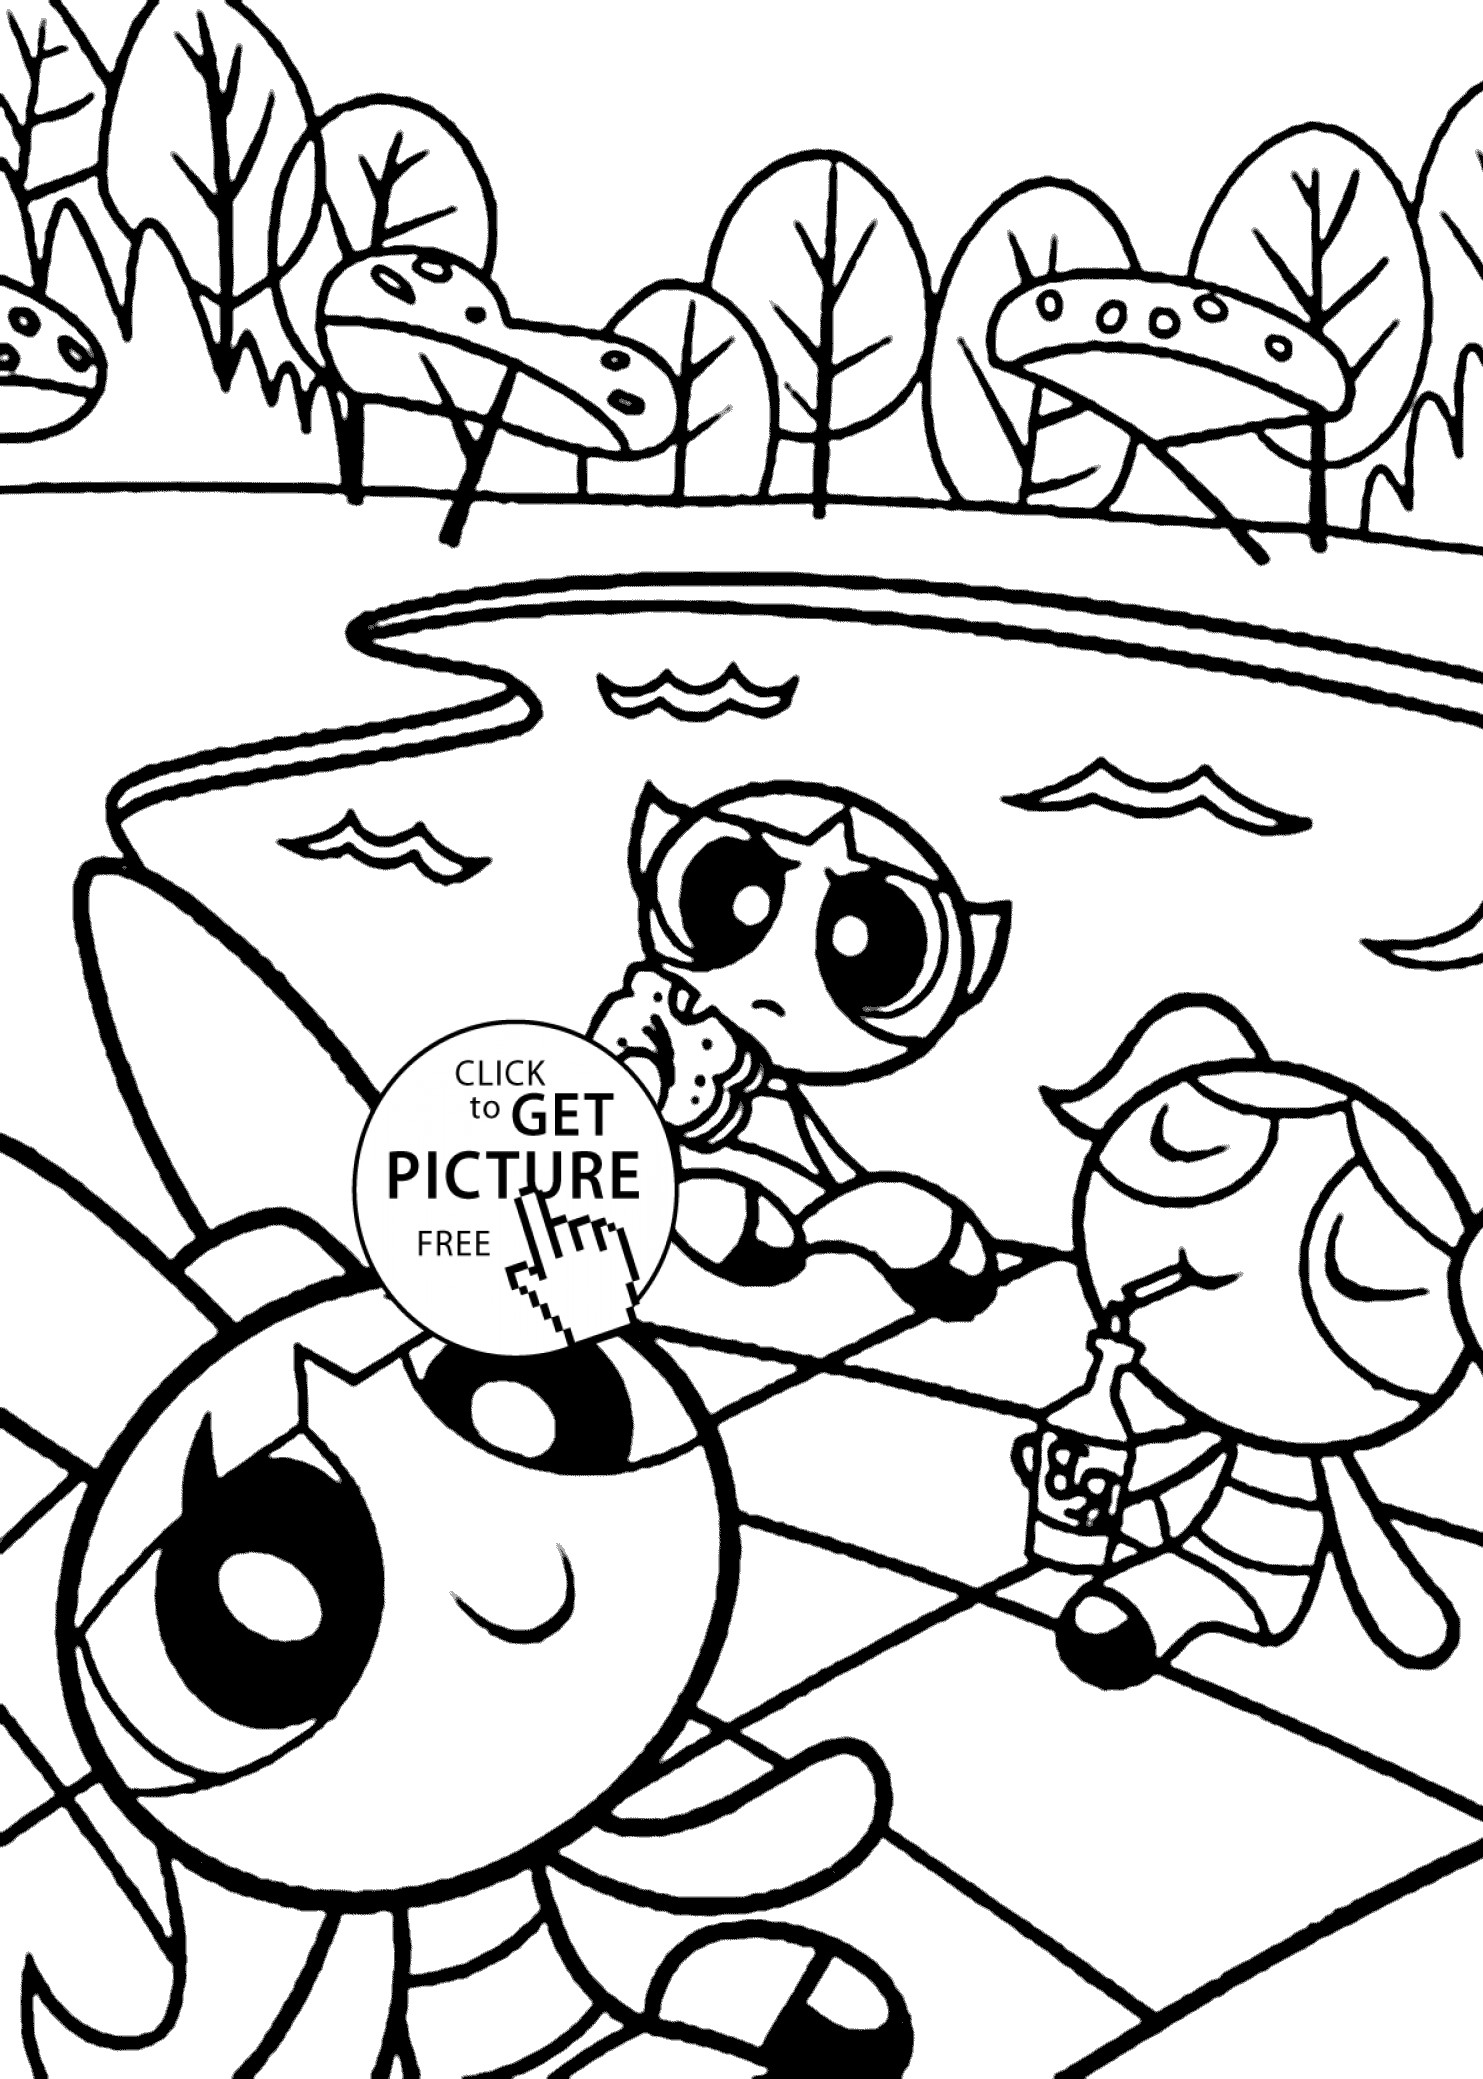 Powerpunk Coloring Sheets For Kids
 Powerpuff girls on vacation coloring pages for kids